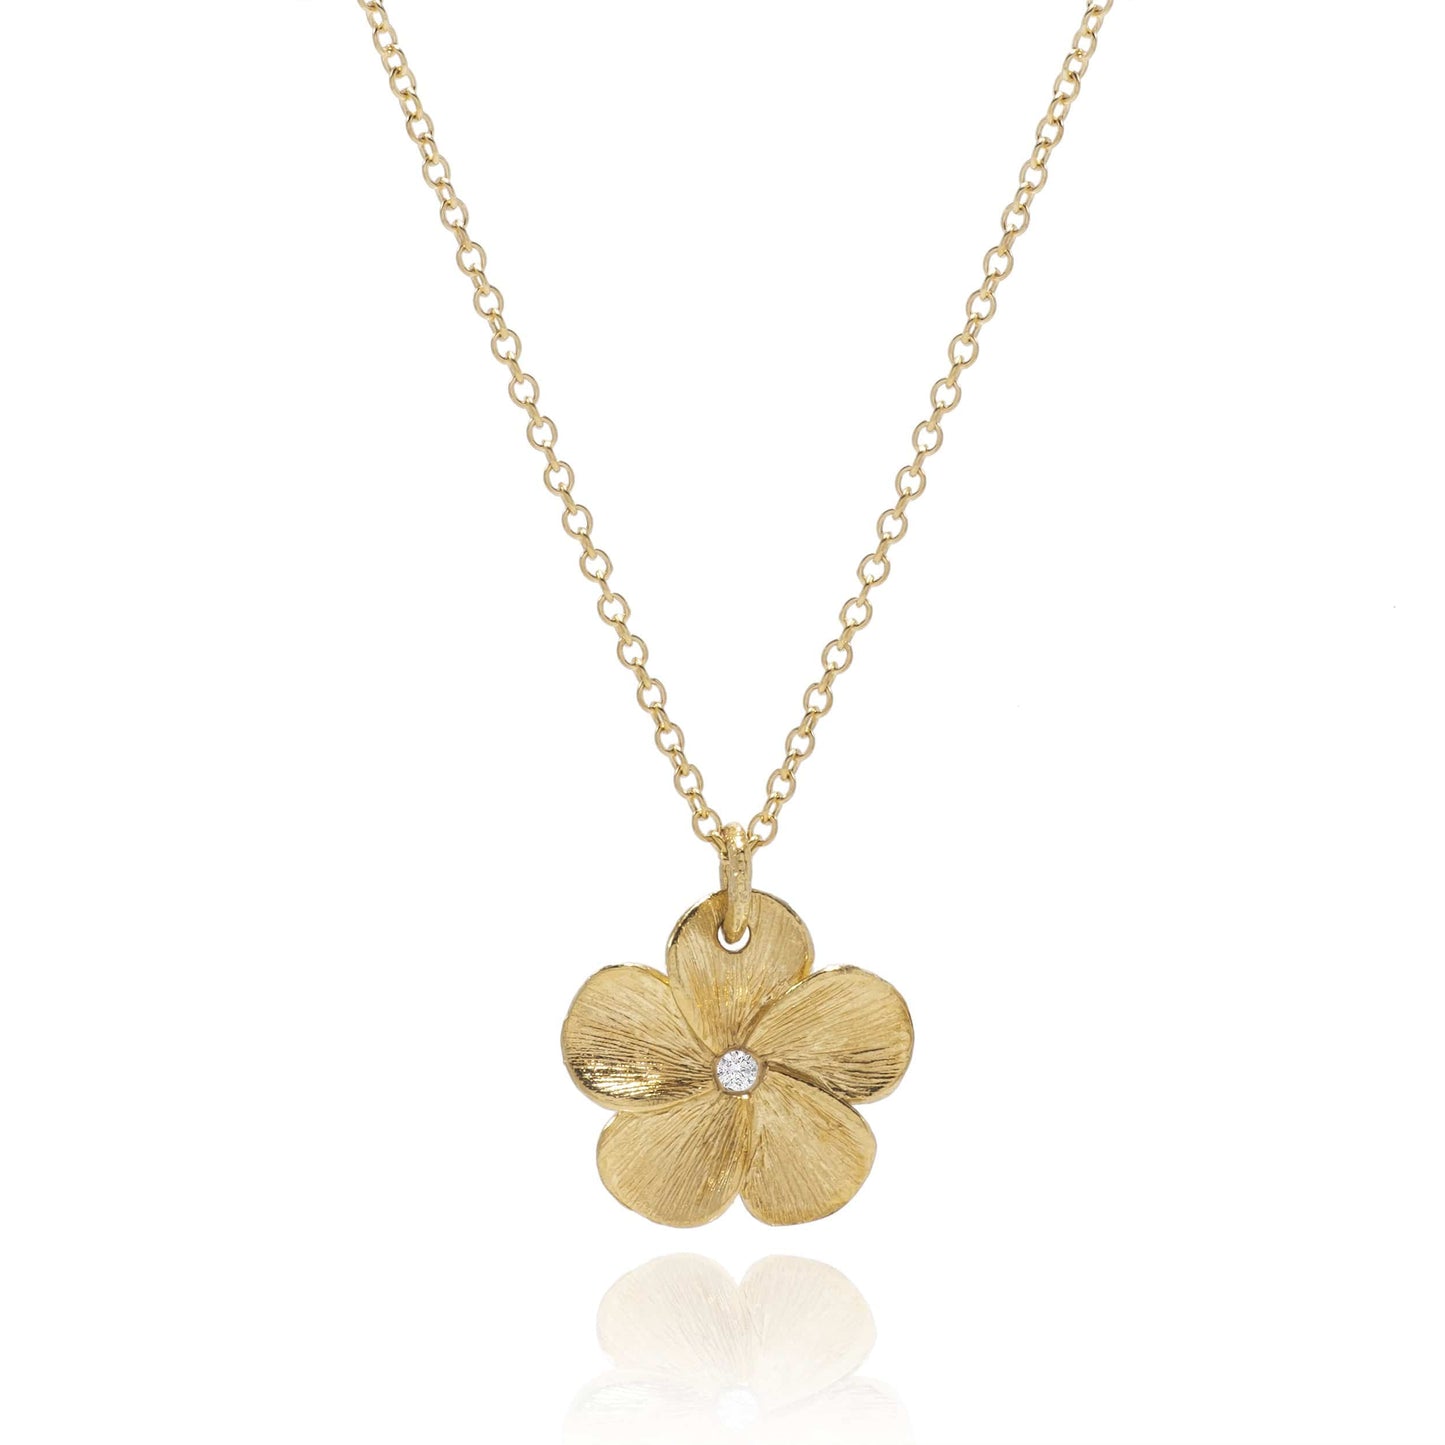 Dalia T Online Necklace Nature Collection 14KT Yellow Gold Diamond Flower Pendant Necklace